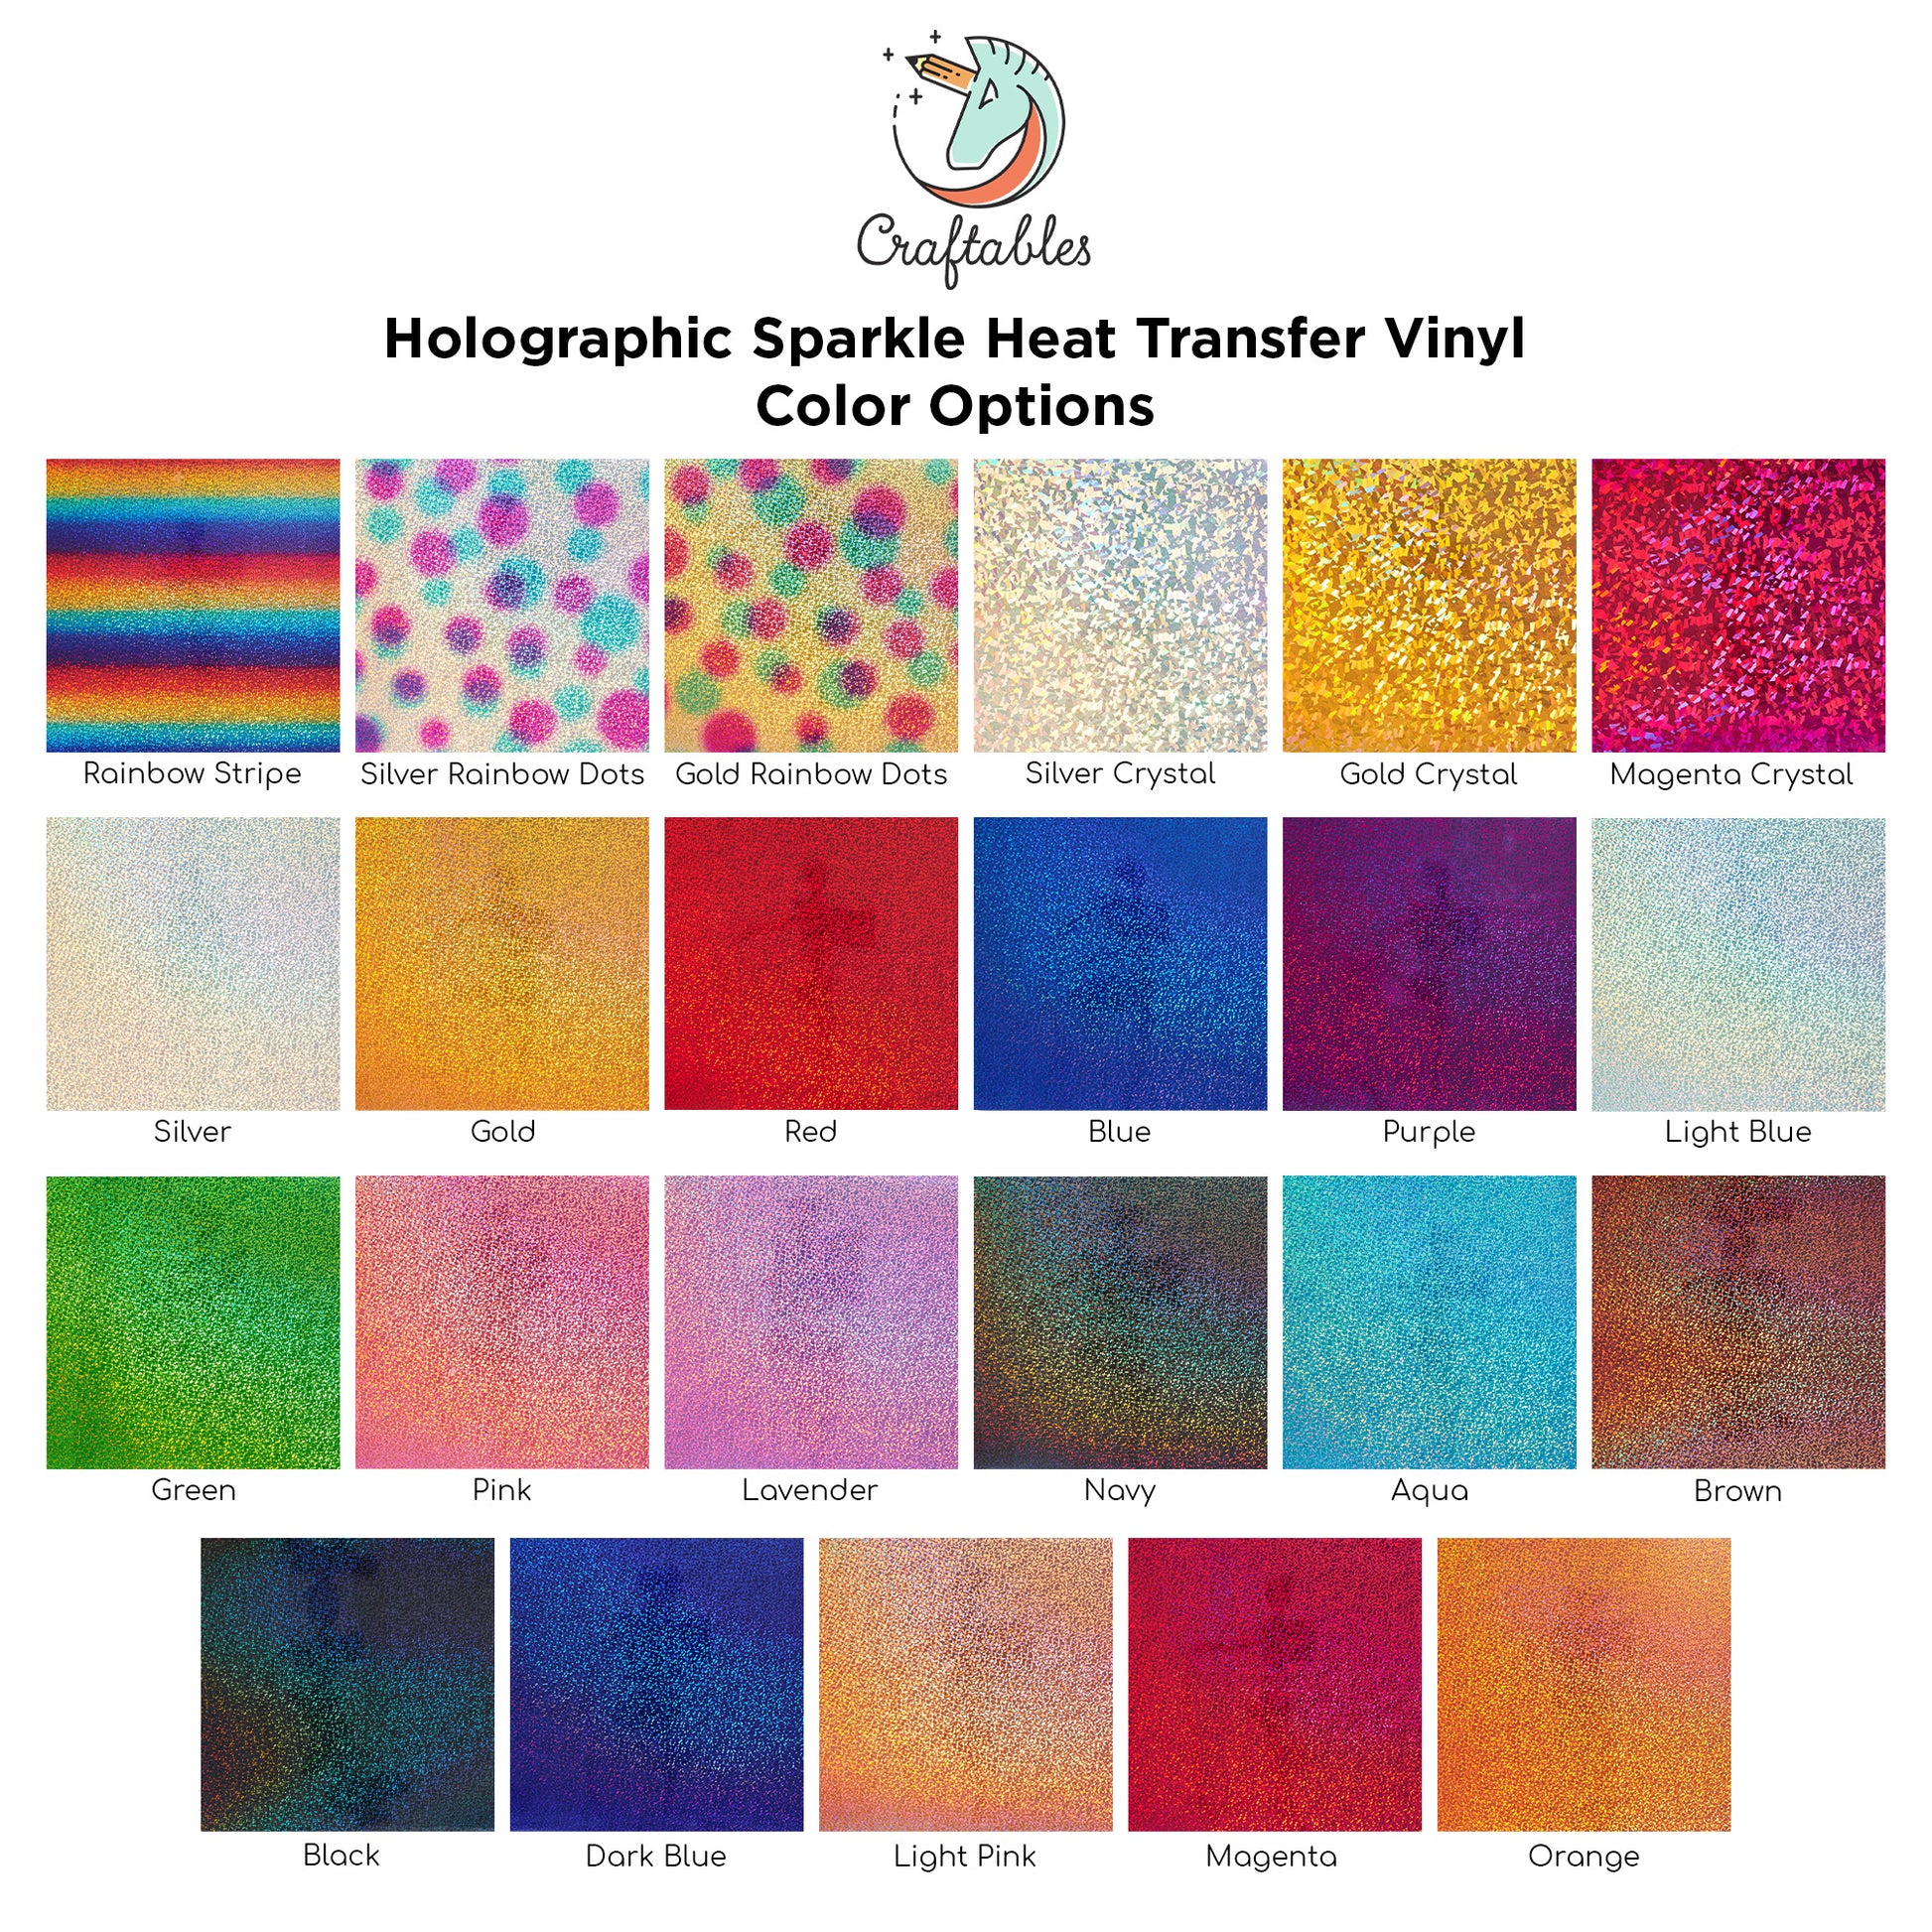 Inkjet Printable Adhesive Vinyl Sheets By Craftables – shopcraftables